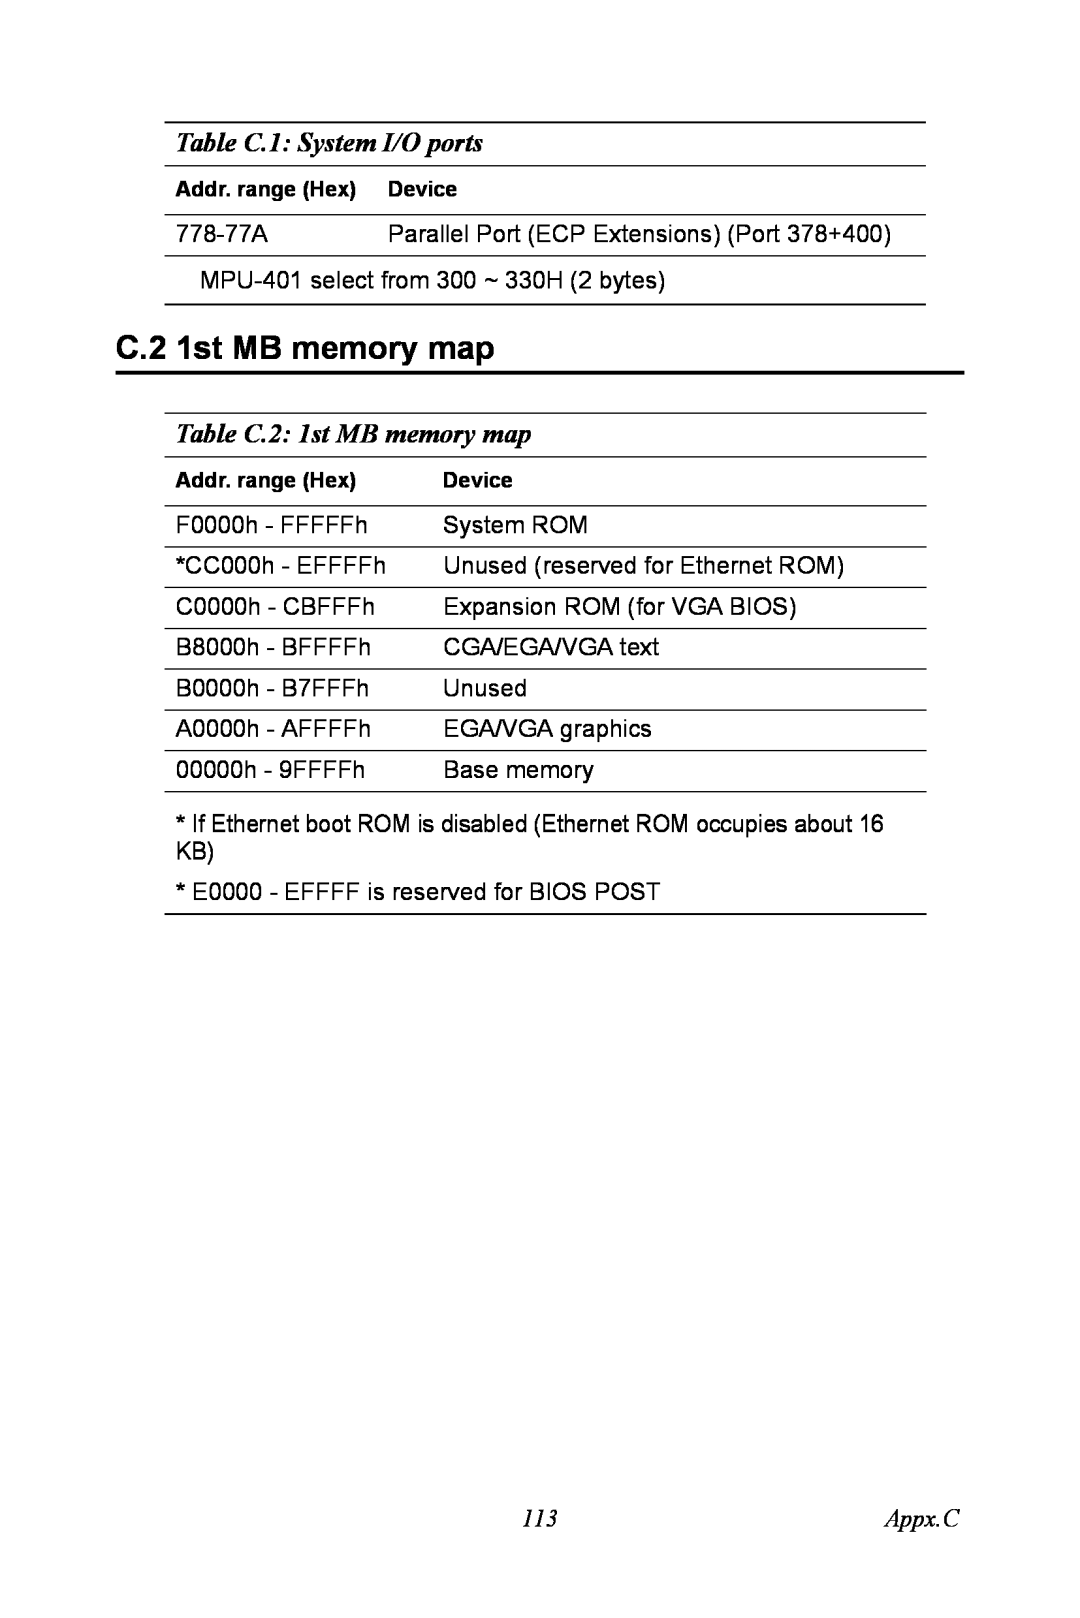 Advantech PCA-6774 user manual Table C.2 1st MB memory map, Table C.1 System I/O ports, 778-77A, Appx.C 